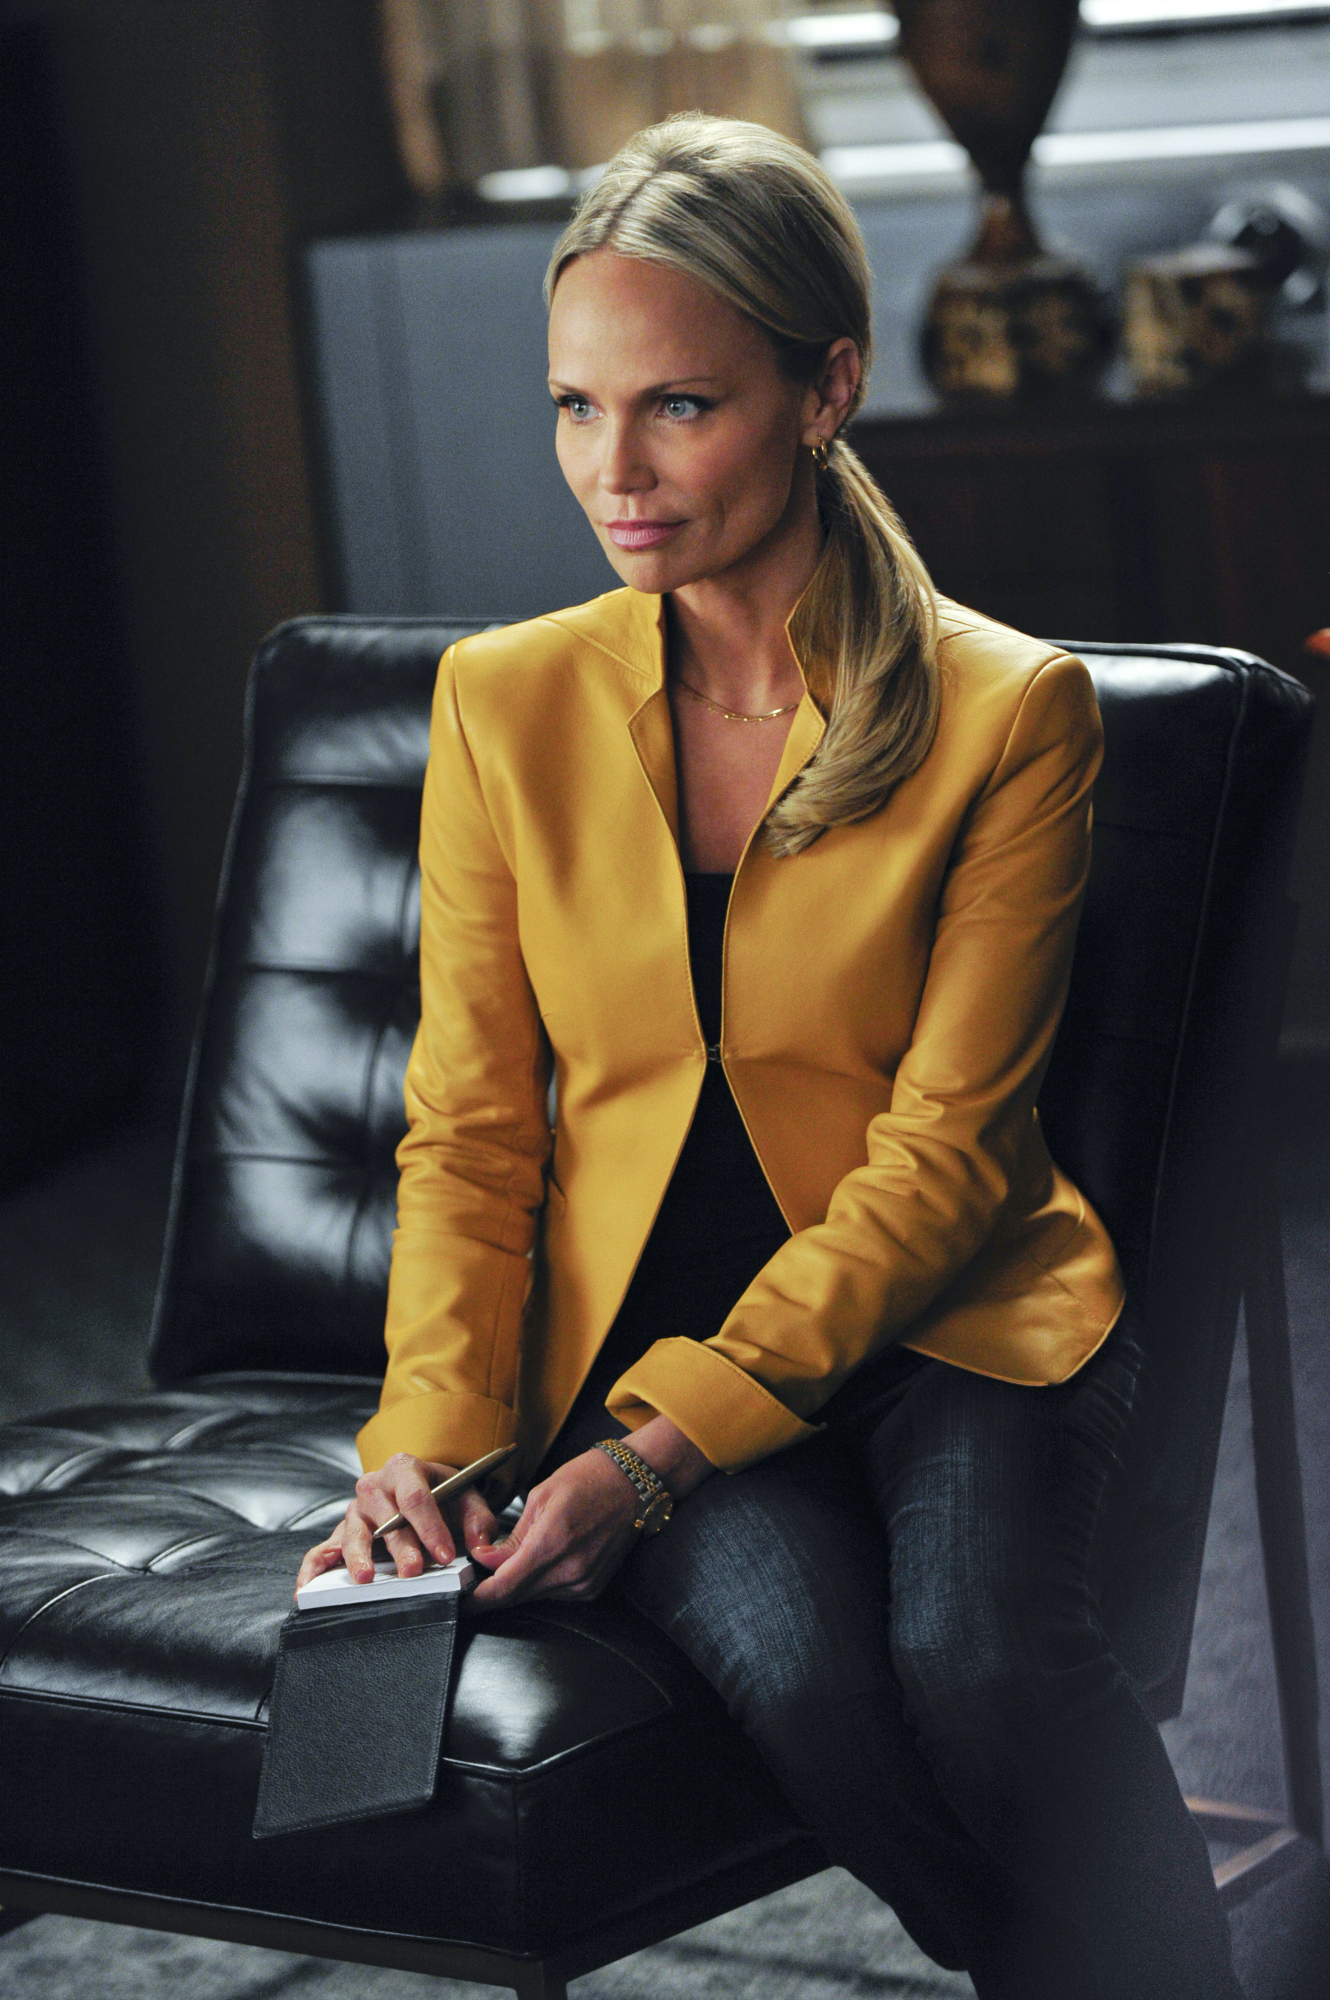 Kristin Chenoweth sitting in a scene from 'The Good Wife'